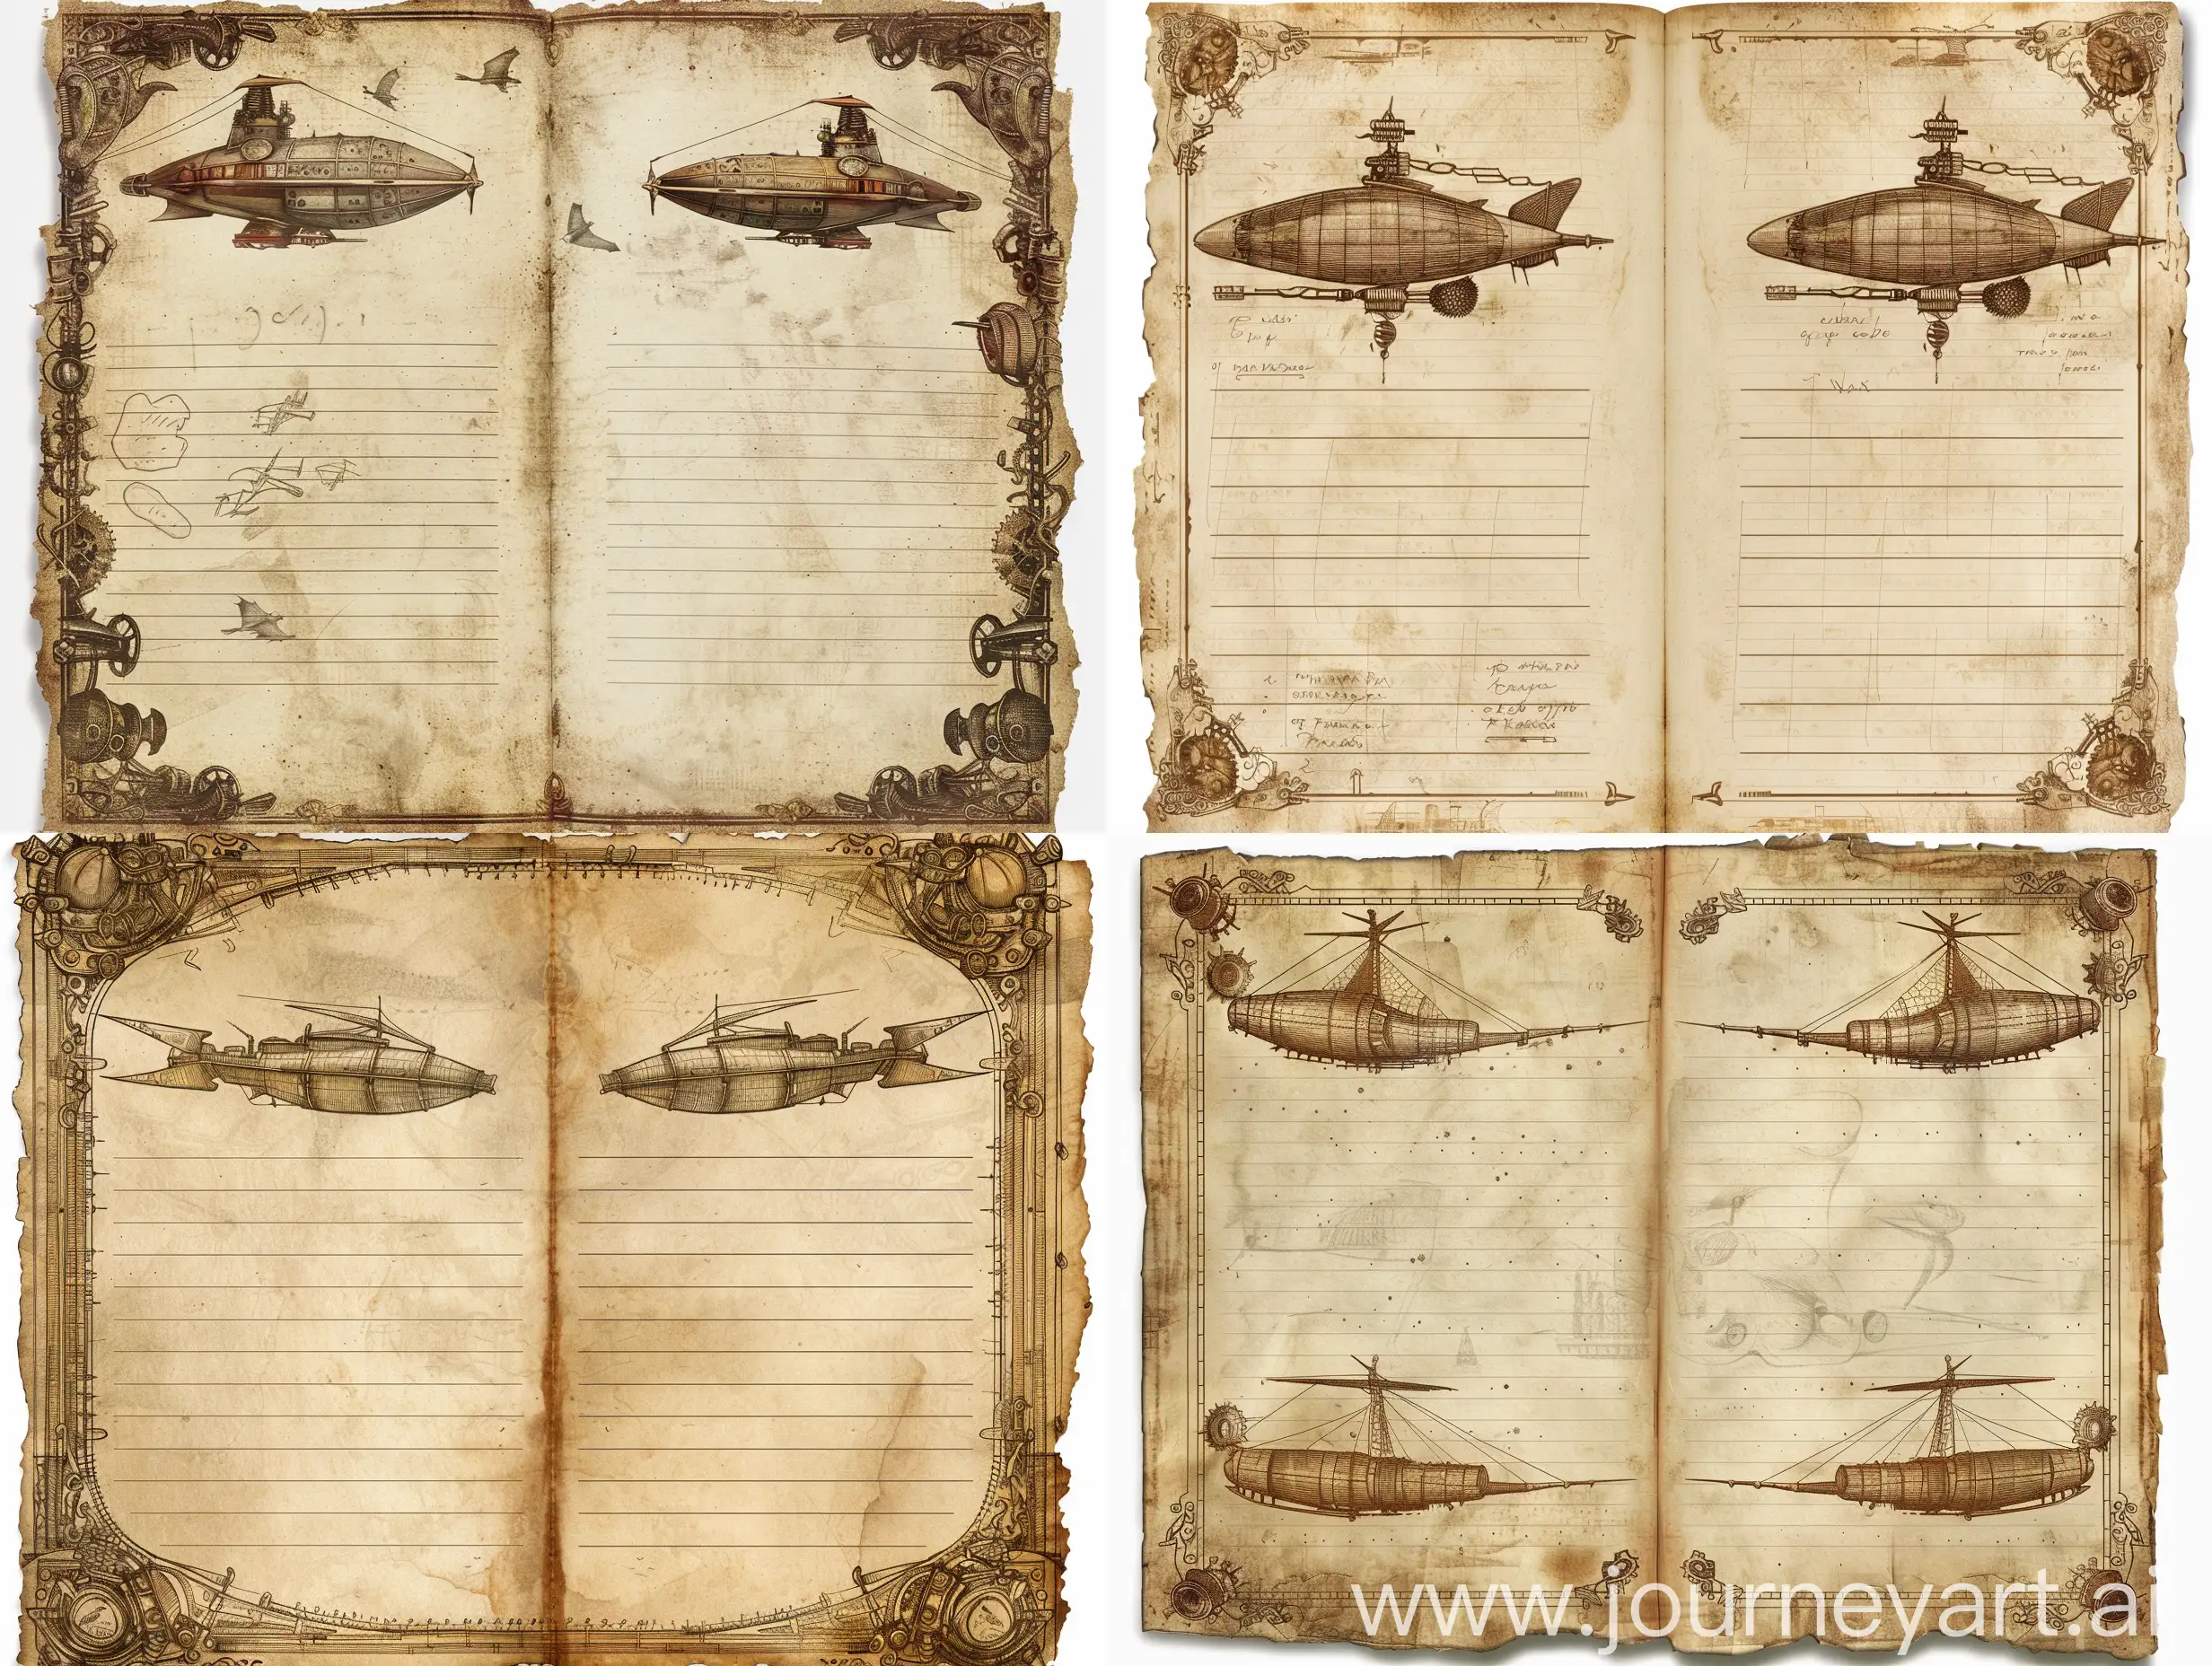 Vintage-Sketchbook-Style-Open-Notebook-with-Steampunk-Airships